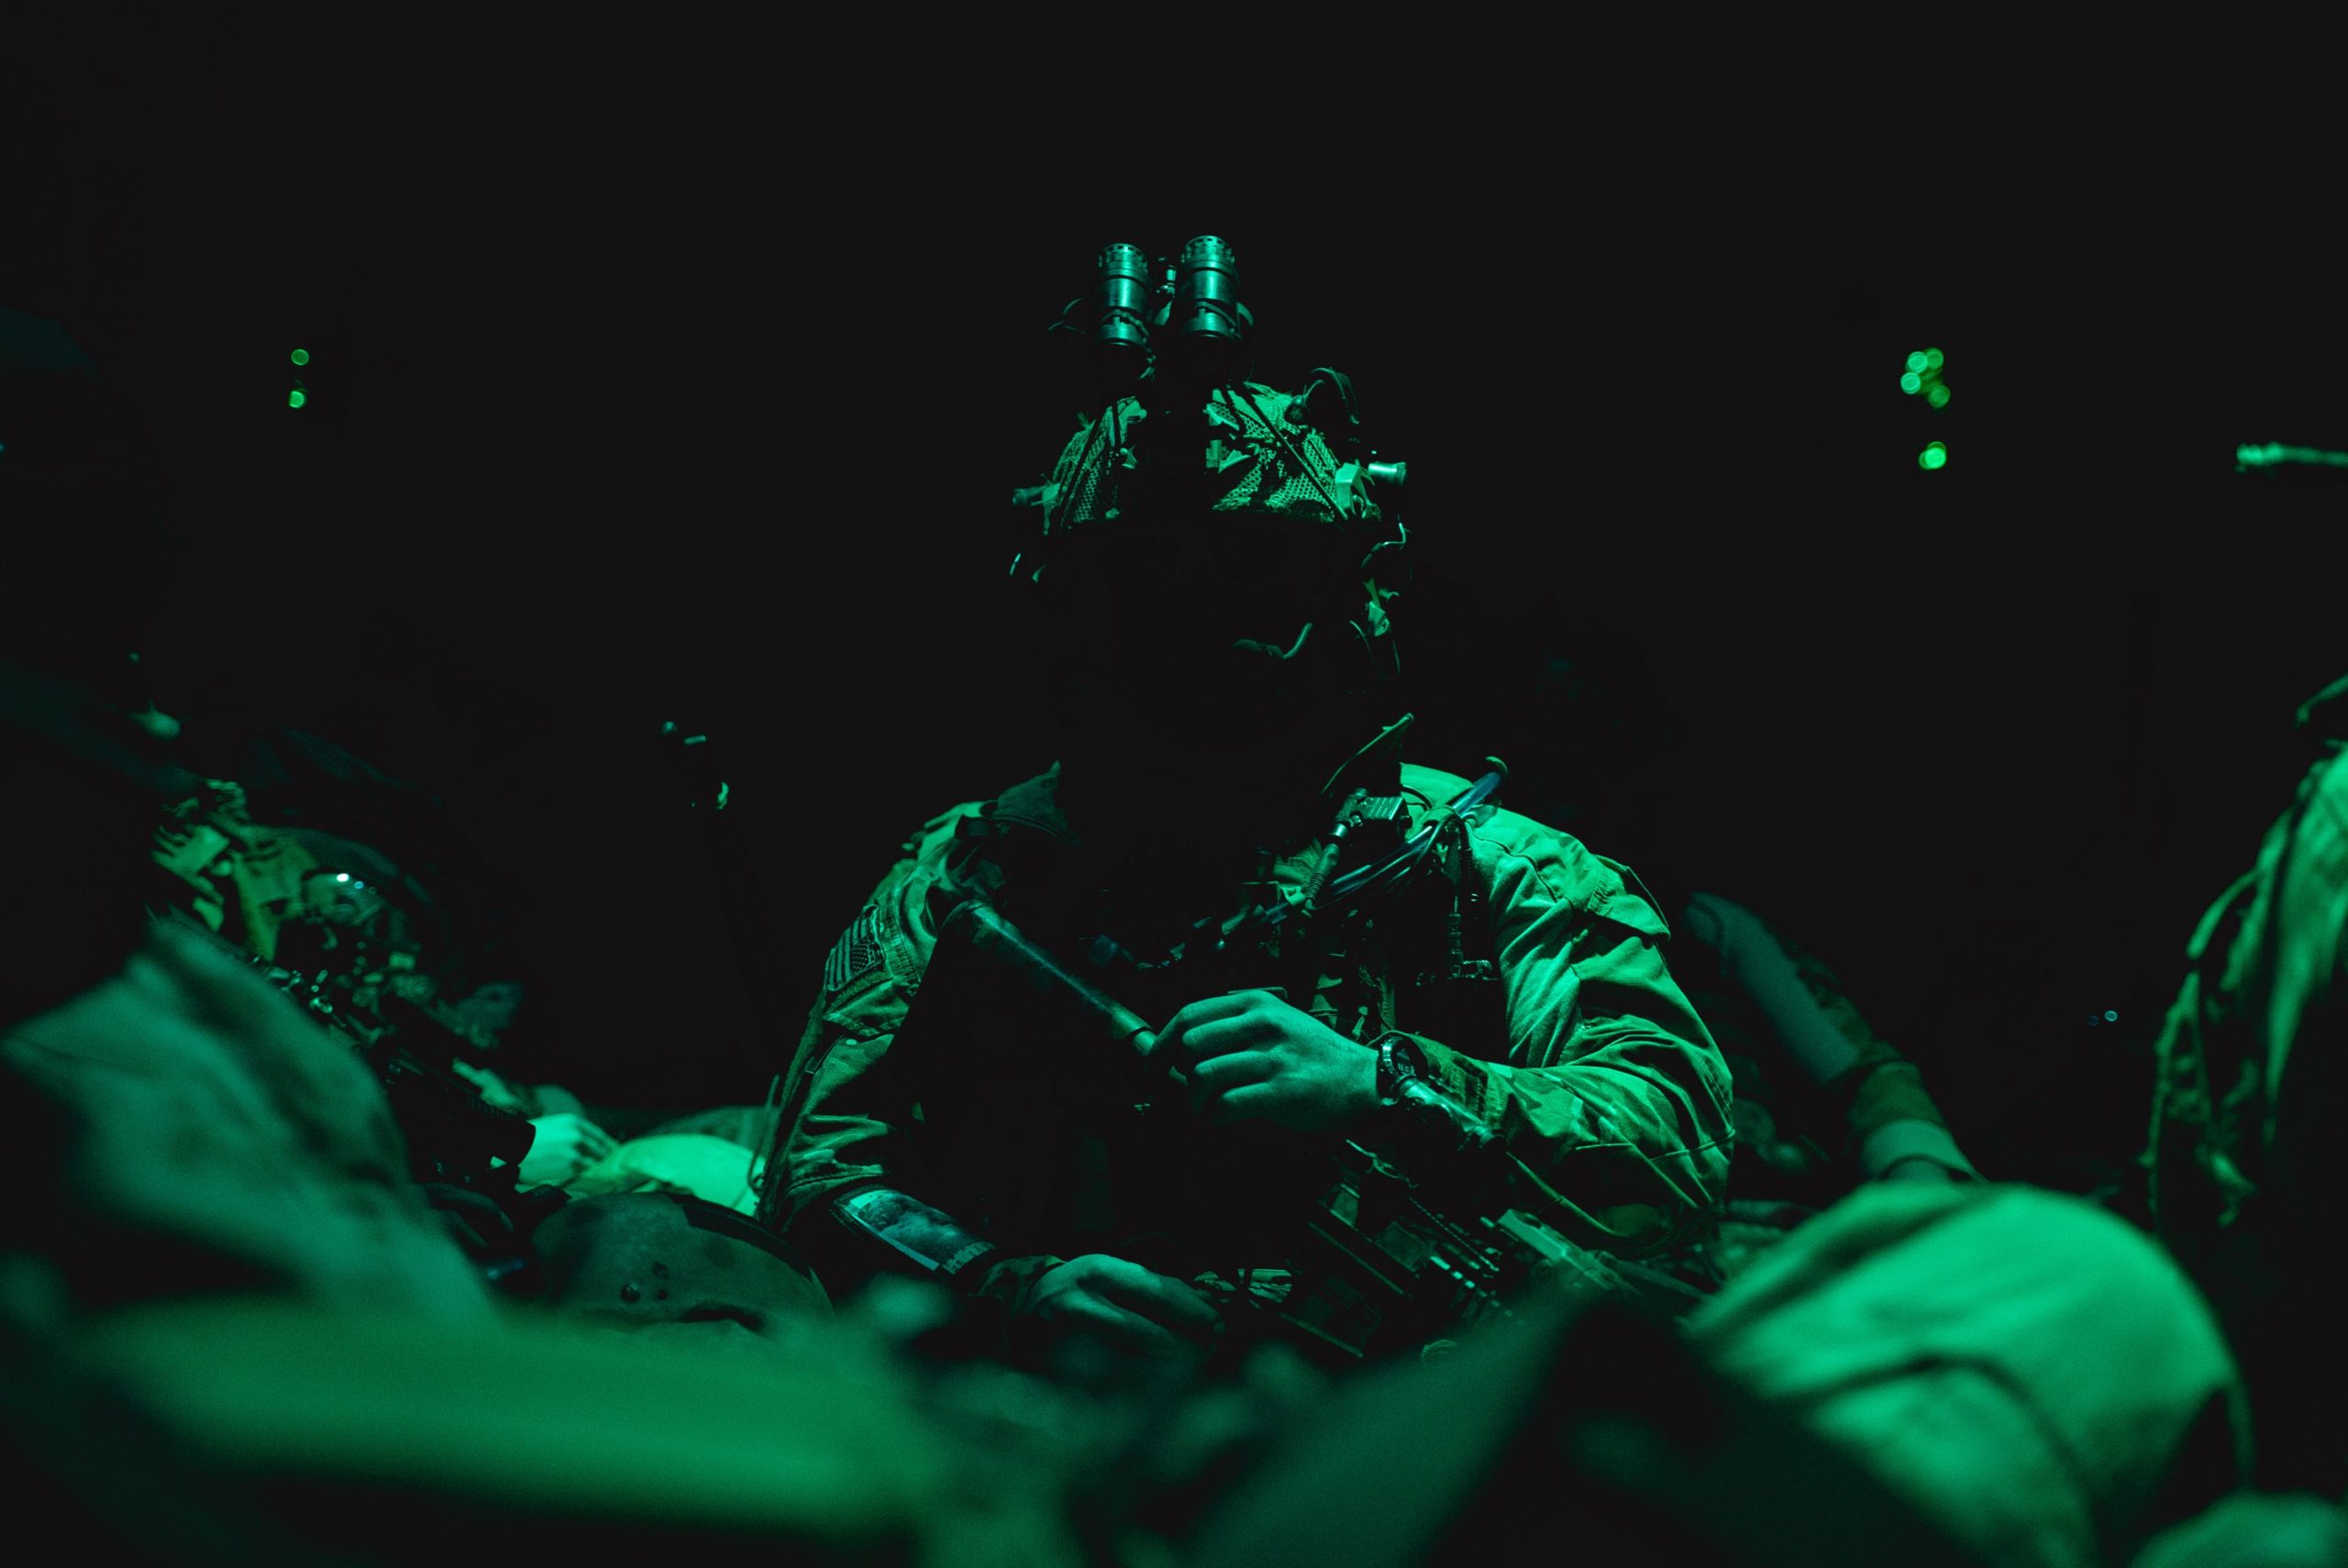 U.S. special operations service members conduct combat operations in support of Operation Resolute Support in Southeast Afghanistan, May 2019. RS is a NATO-led mission to train, advise, and assist the Afghan National Defense and Security Forces and institutions. (U.S. Army photo by Sgt. Jaerett Engeseth)